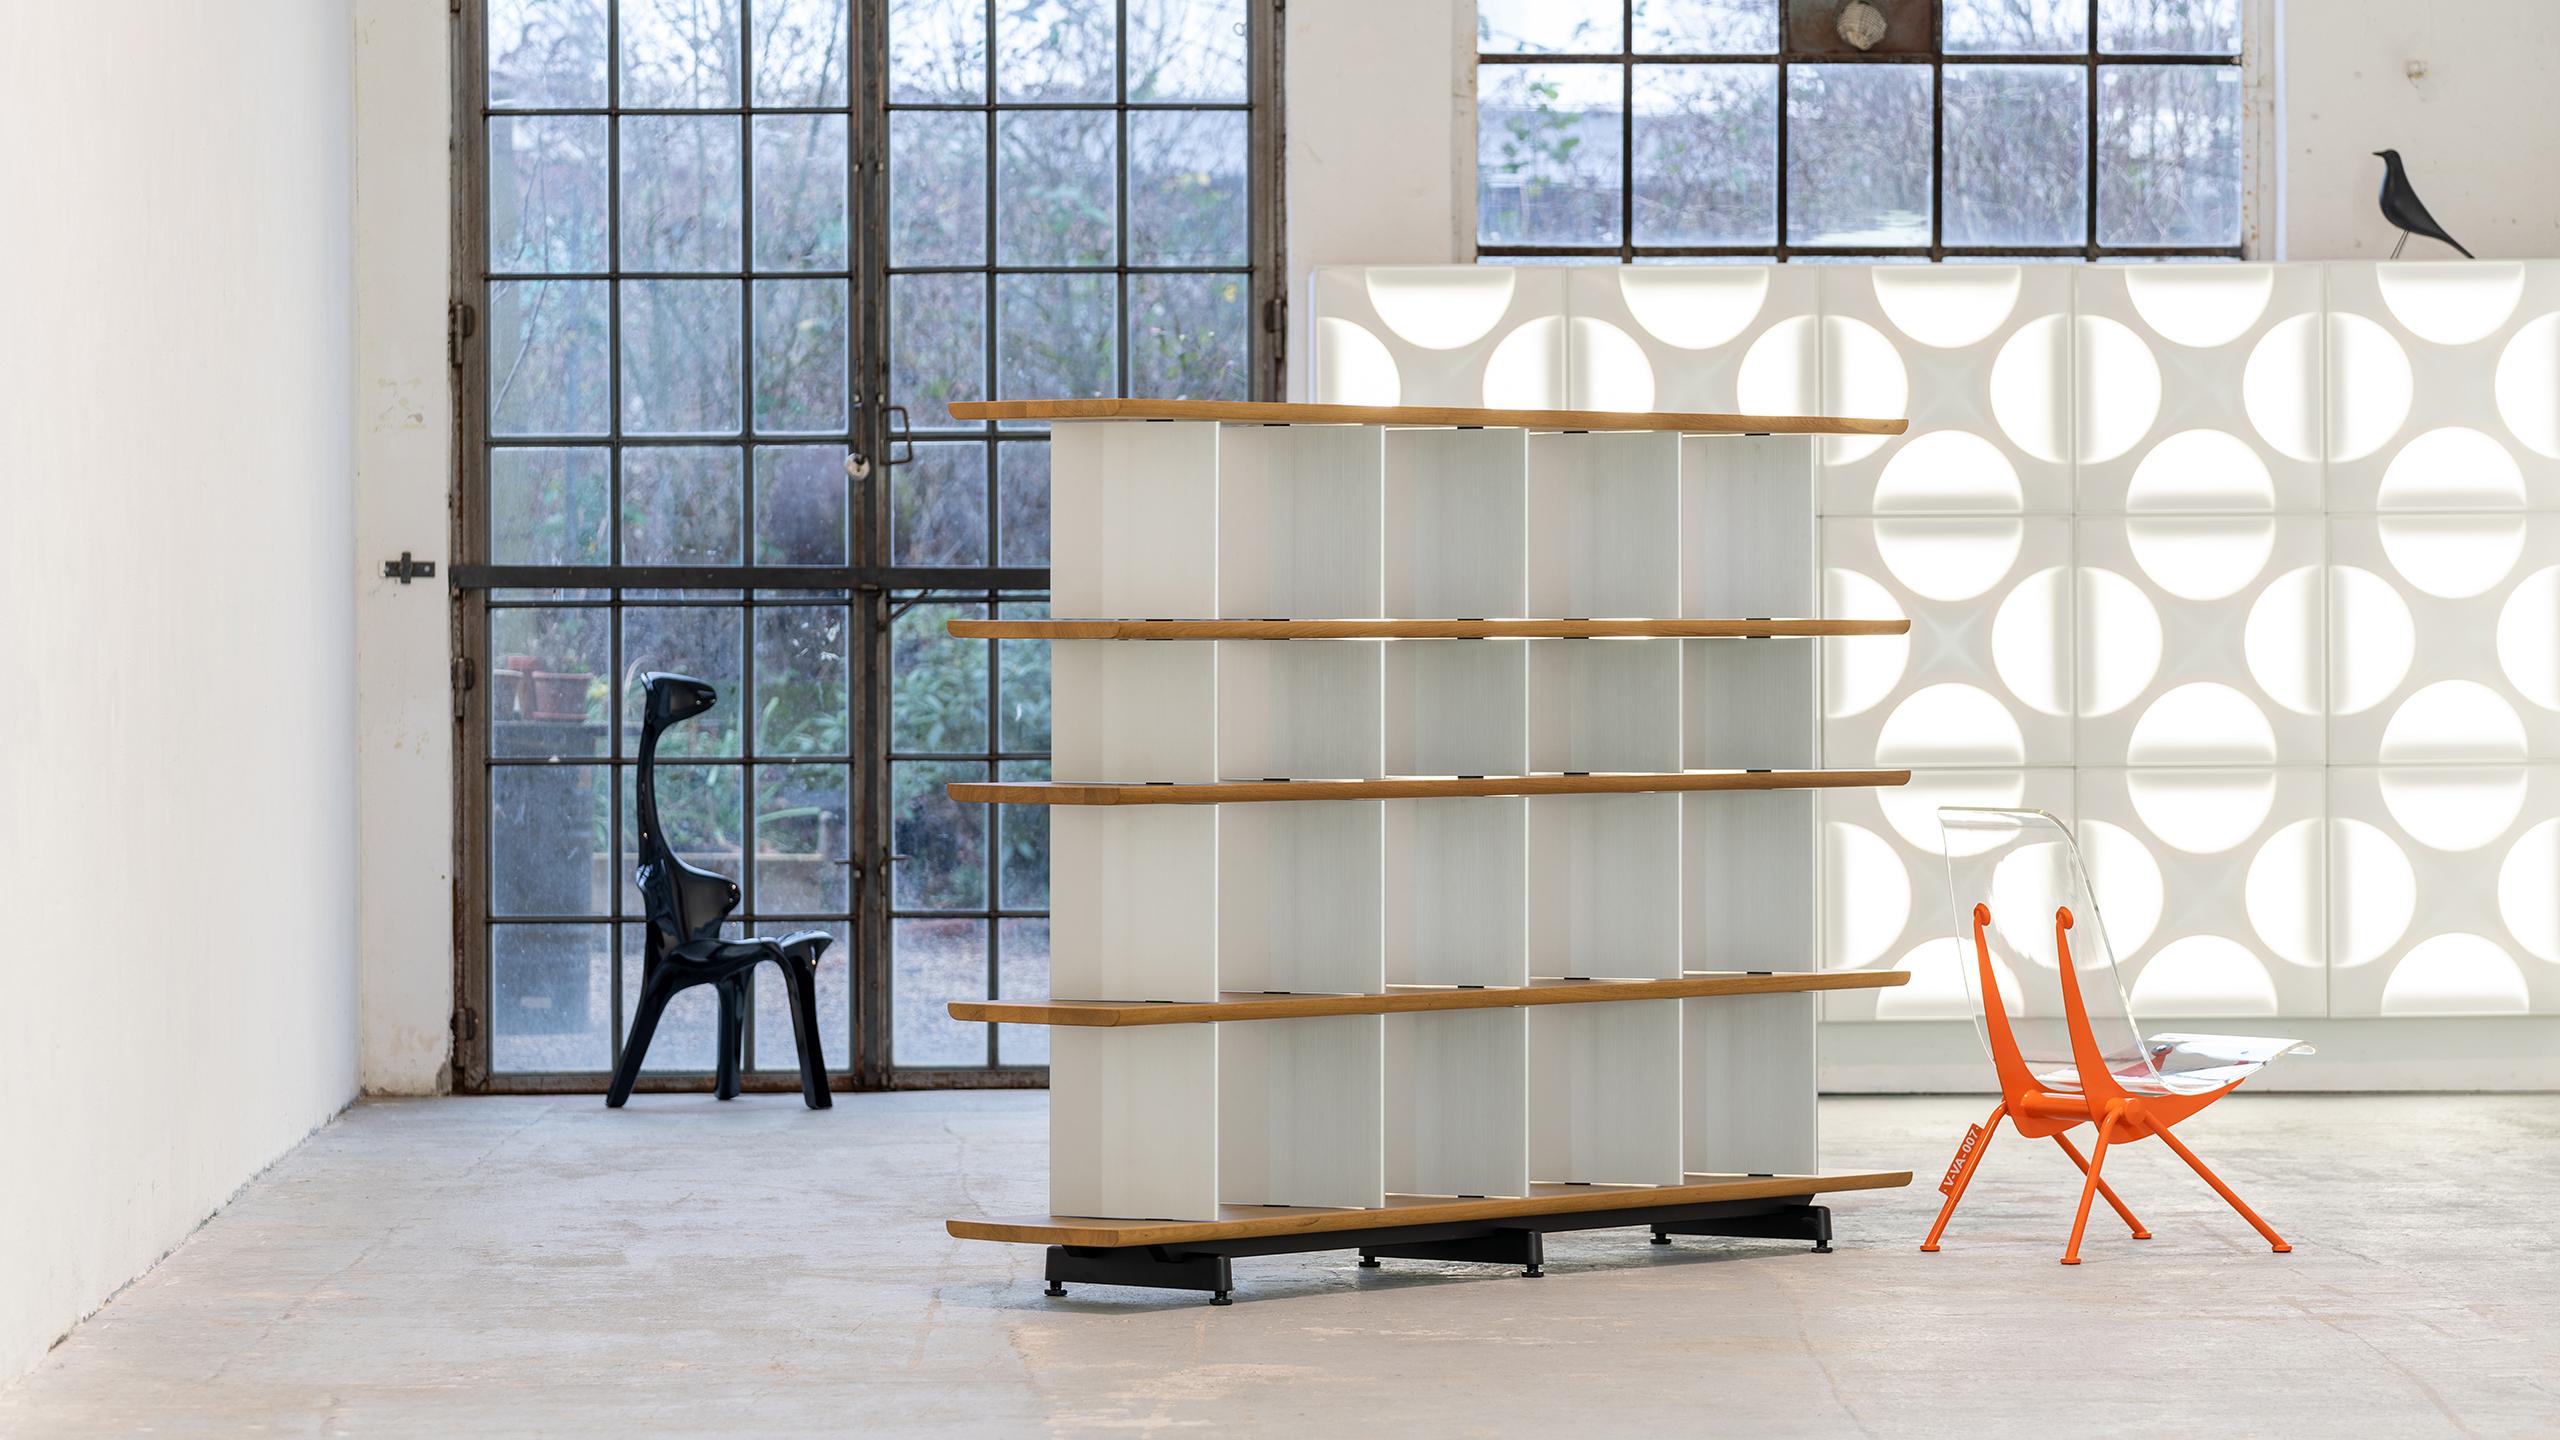 Edward Barber and Jay Osgerby have designed Planophore 2014 for Vitra as a dual-purpose - room divider and bookshelf.
Its open sides create a horizontal emphasis underscored by the solid shelves with rounded bottom edges, which are reminiscent of